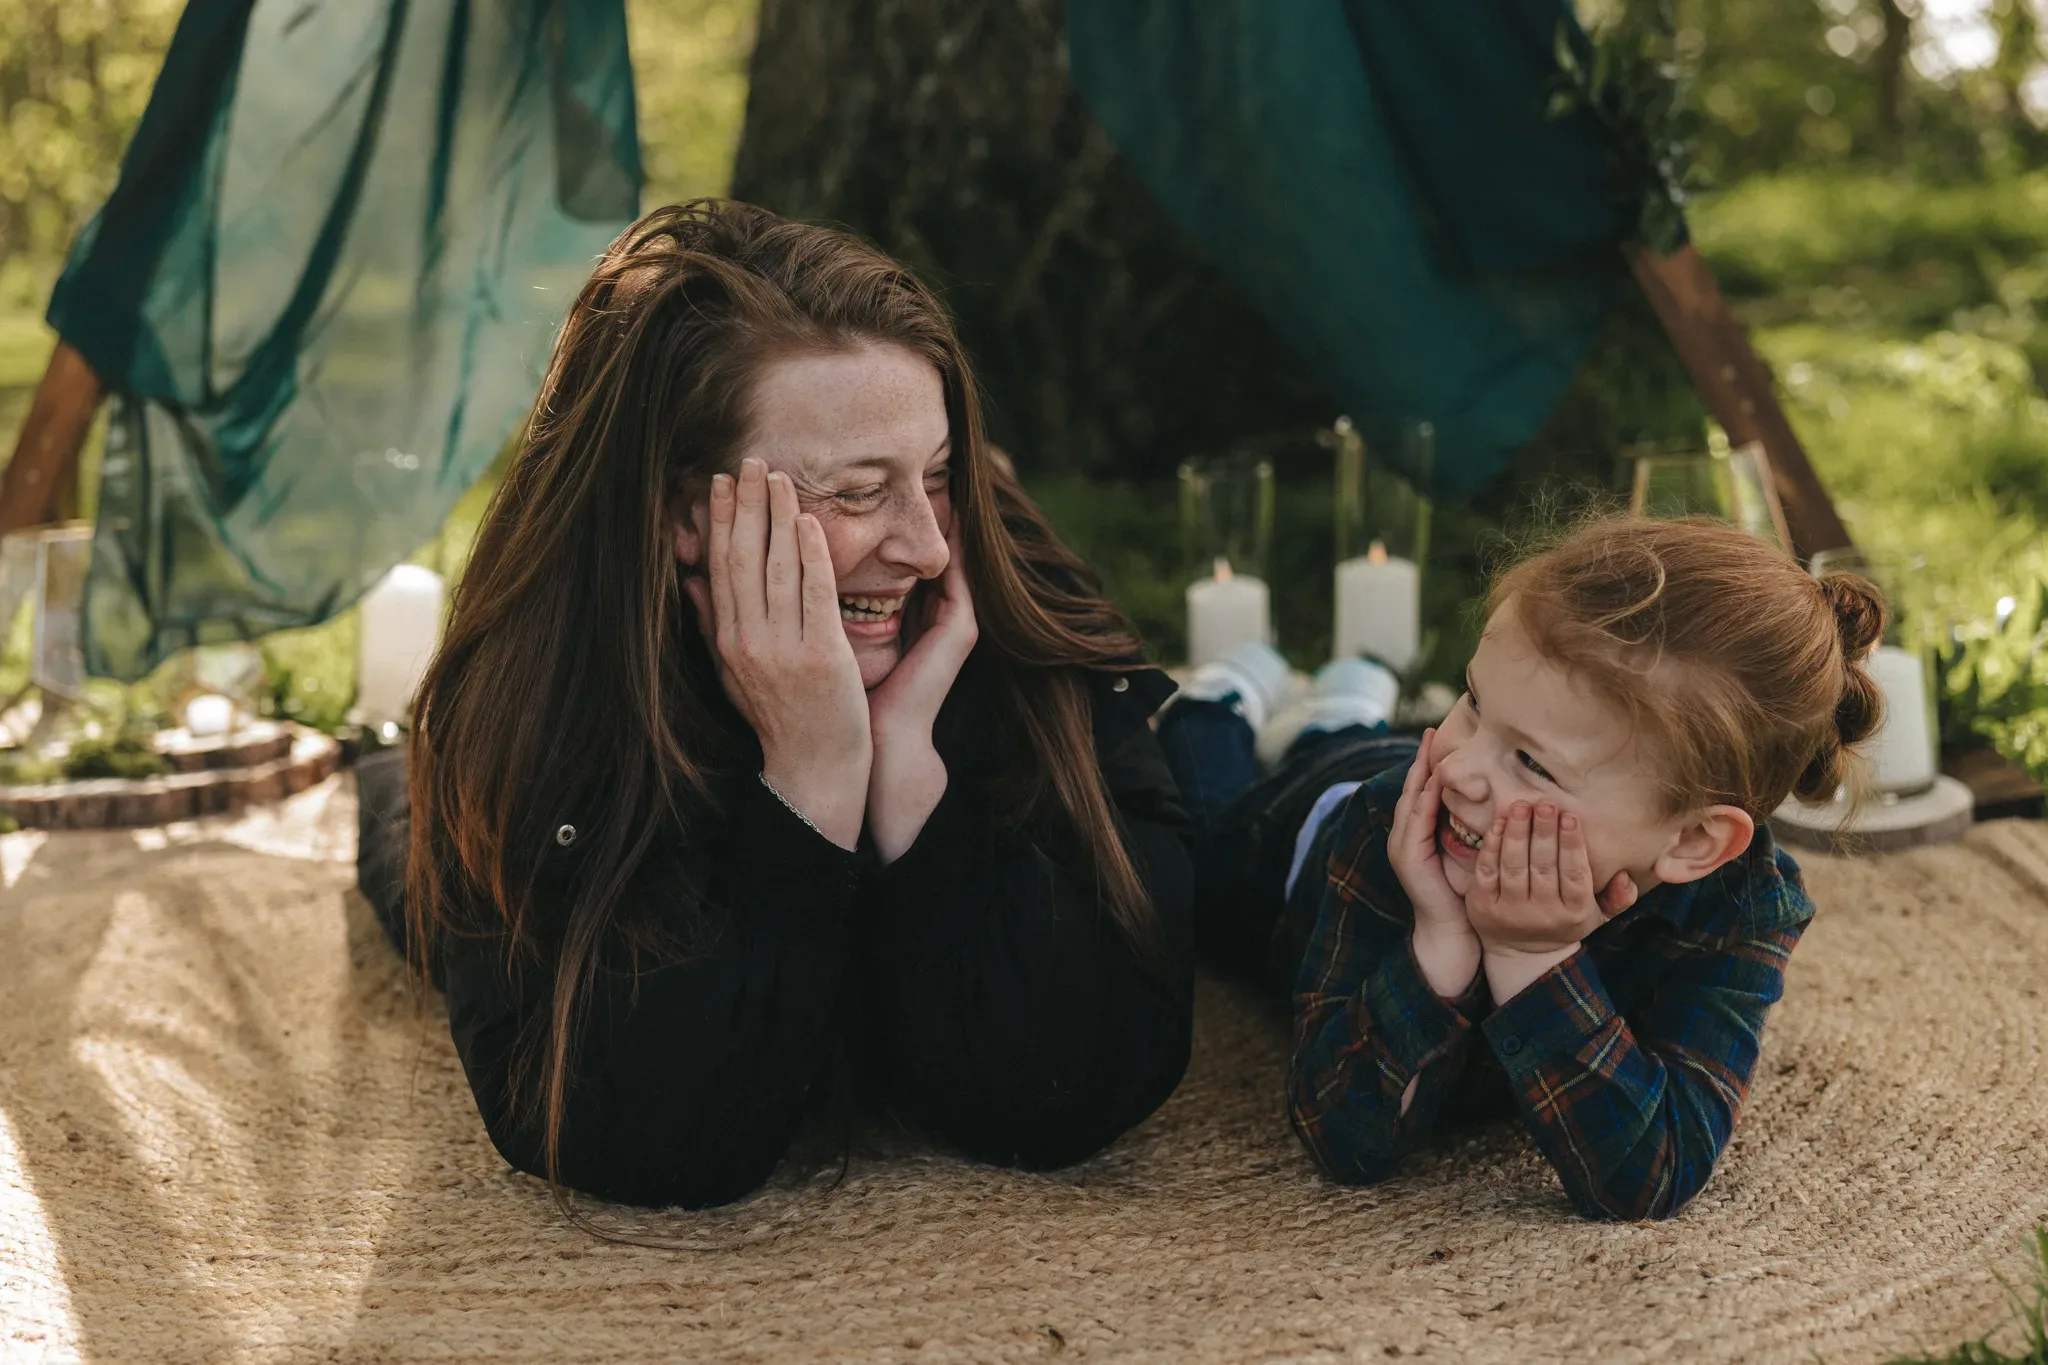 A woman and a young child, both with joyful expressions, lying on a blanket outdoors. the child, wearing a plaid shirt, touches their face mirroring the woman’s pose. greenery and candles in the background create a cozy atmosphere.